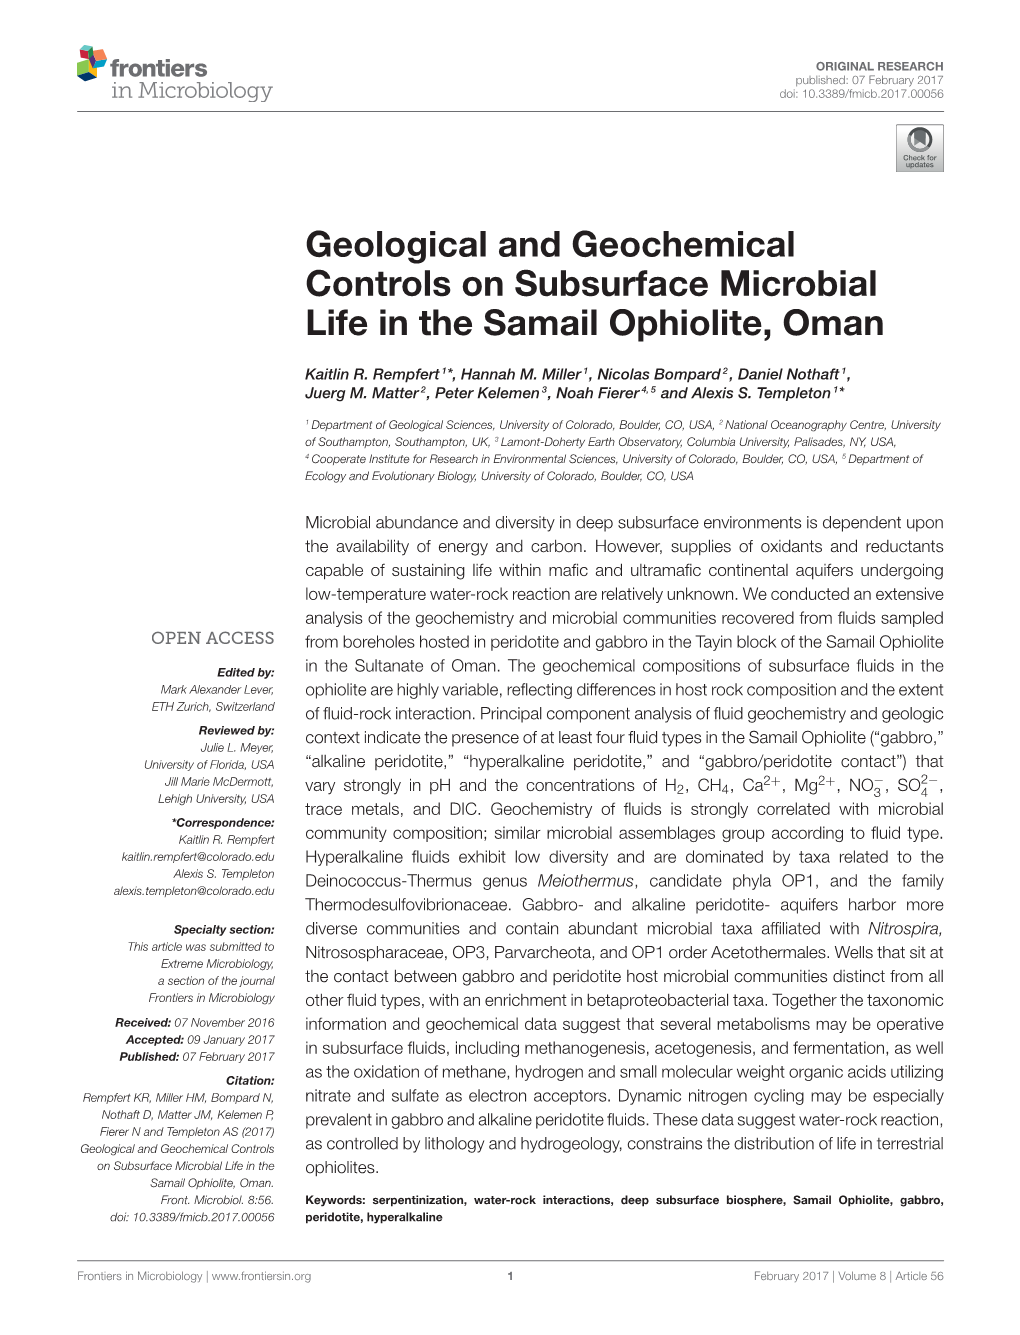 Geological and Geochemical Controls on Subsurface Microbial Life in the Samail Ophiolite, Oman